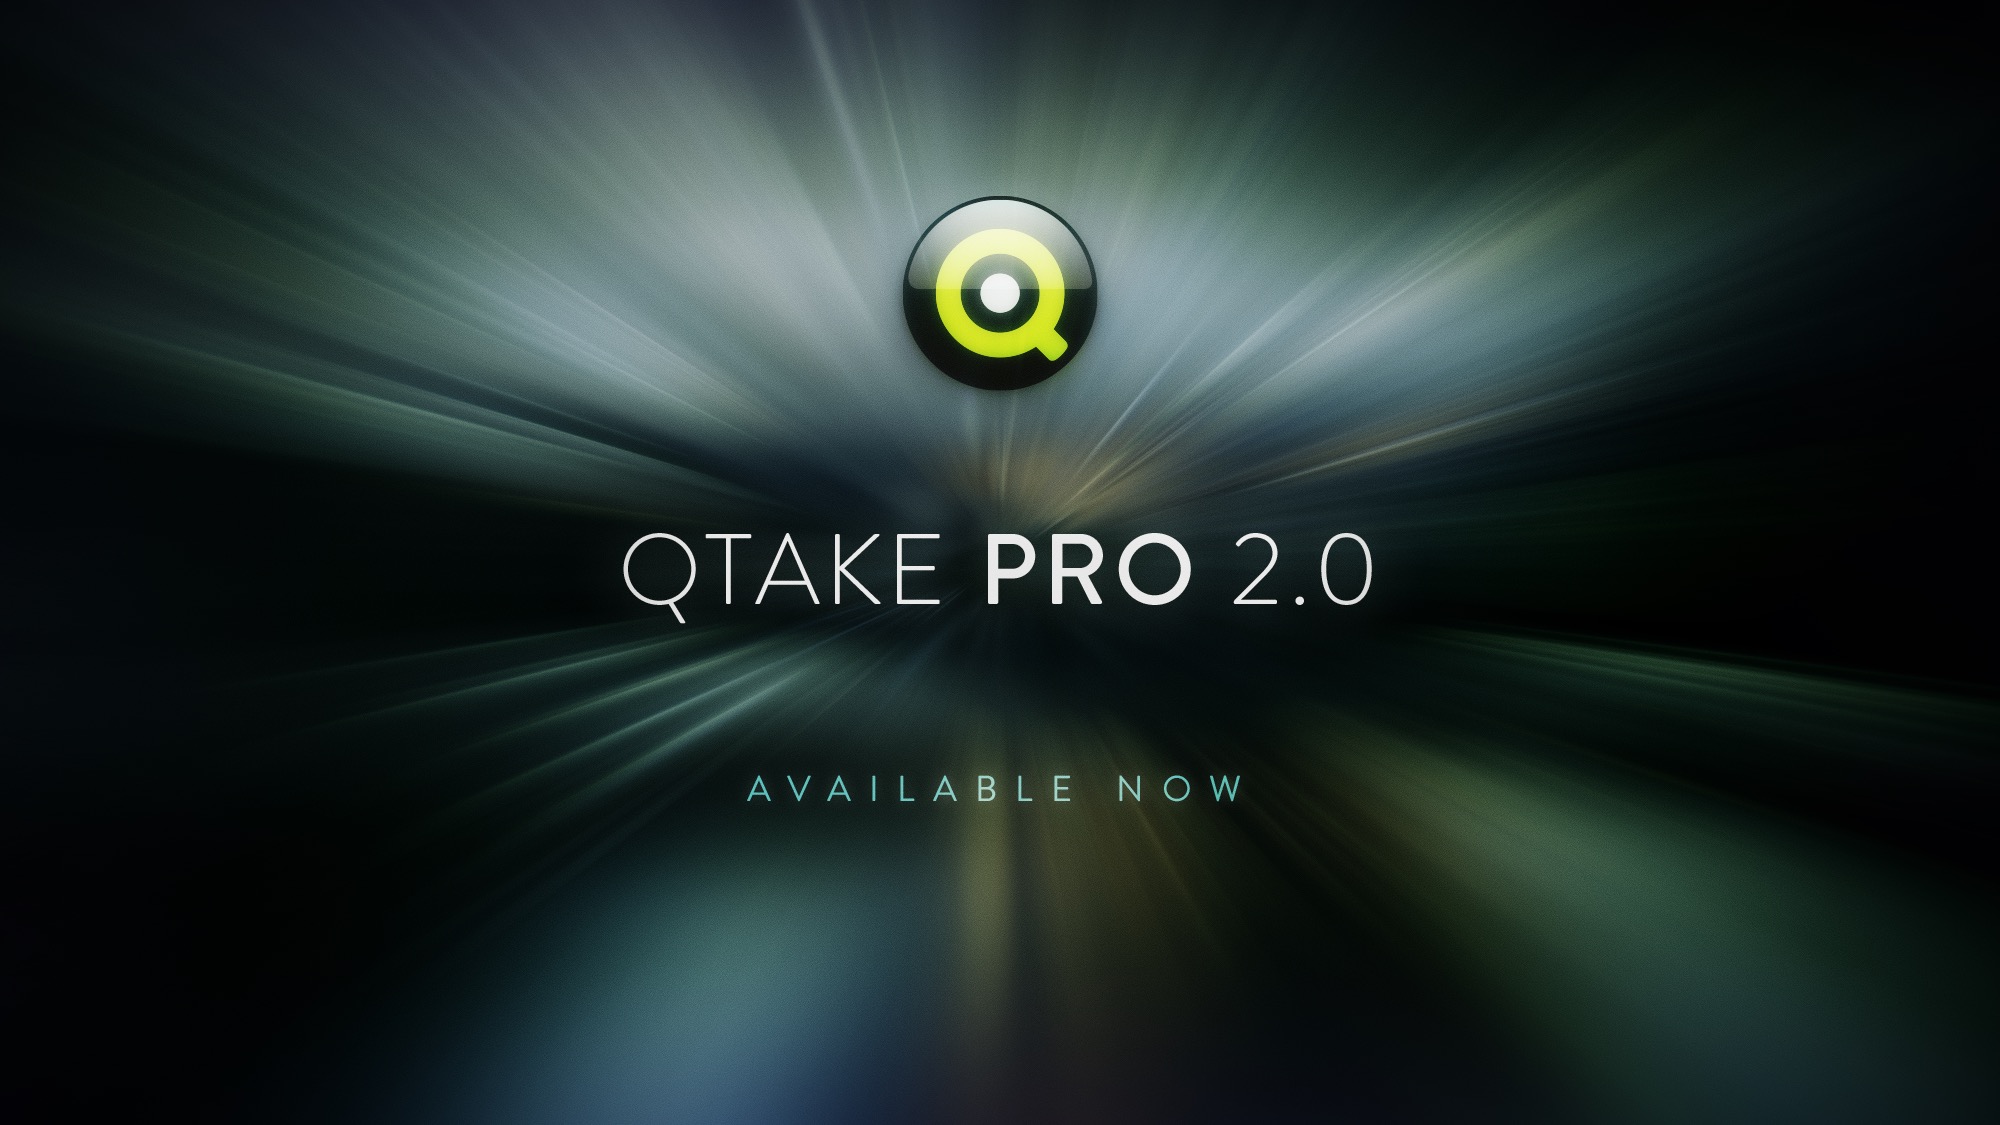 QTAKE Pro is coming